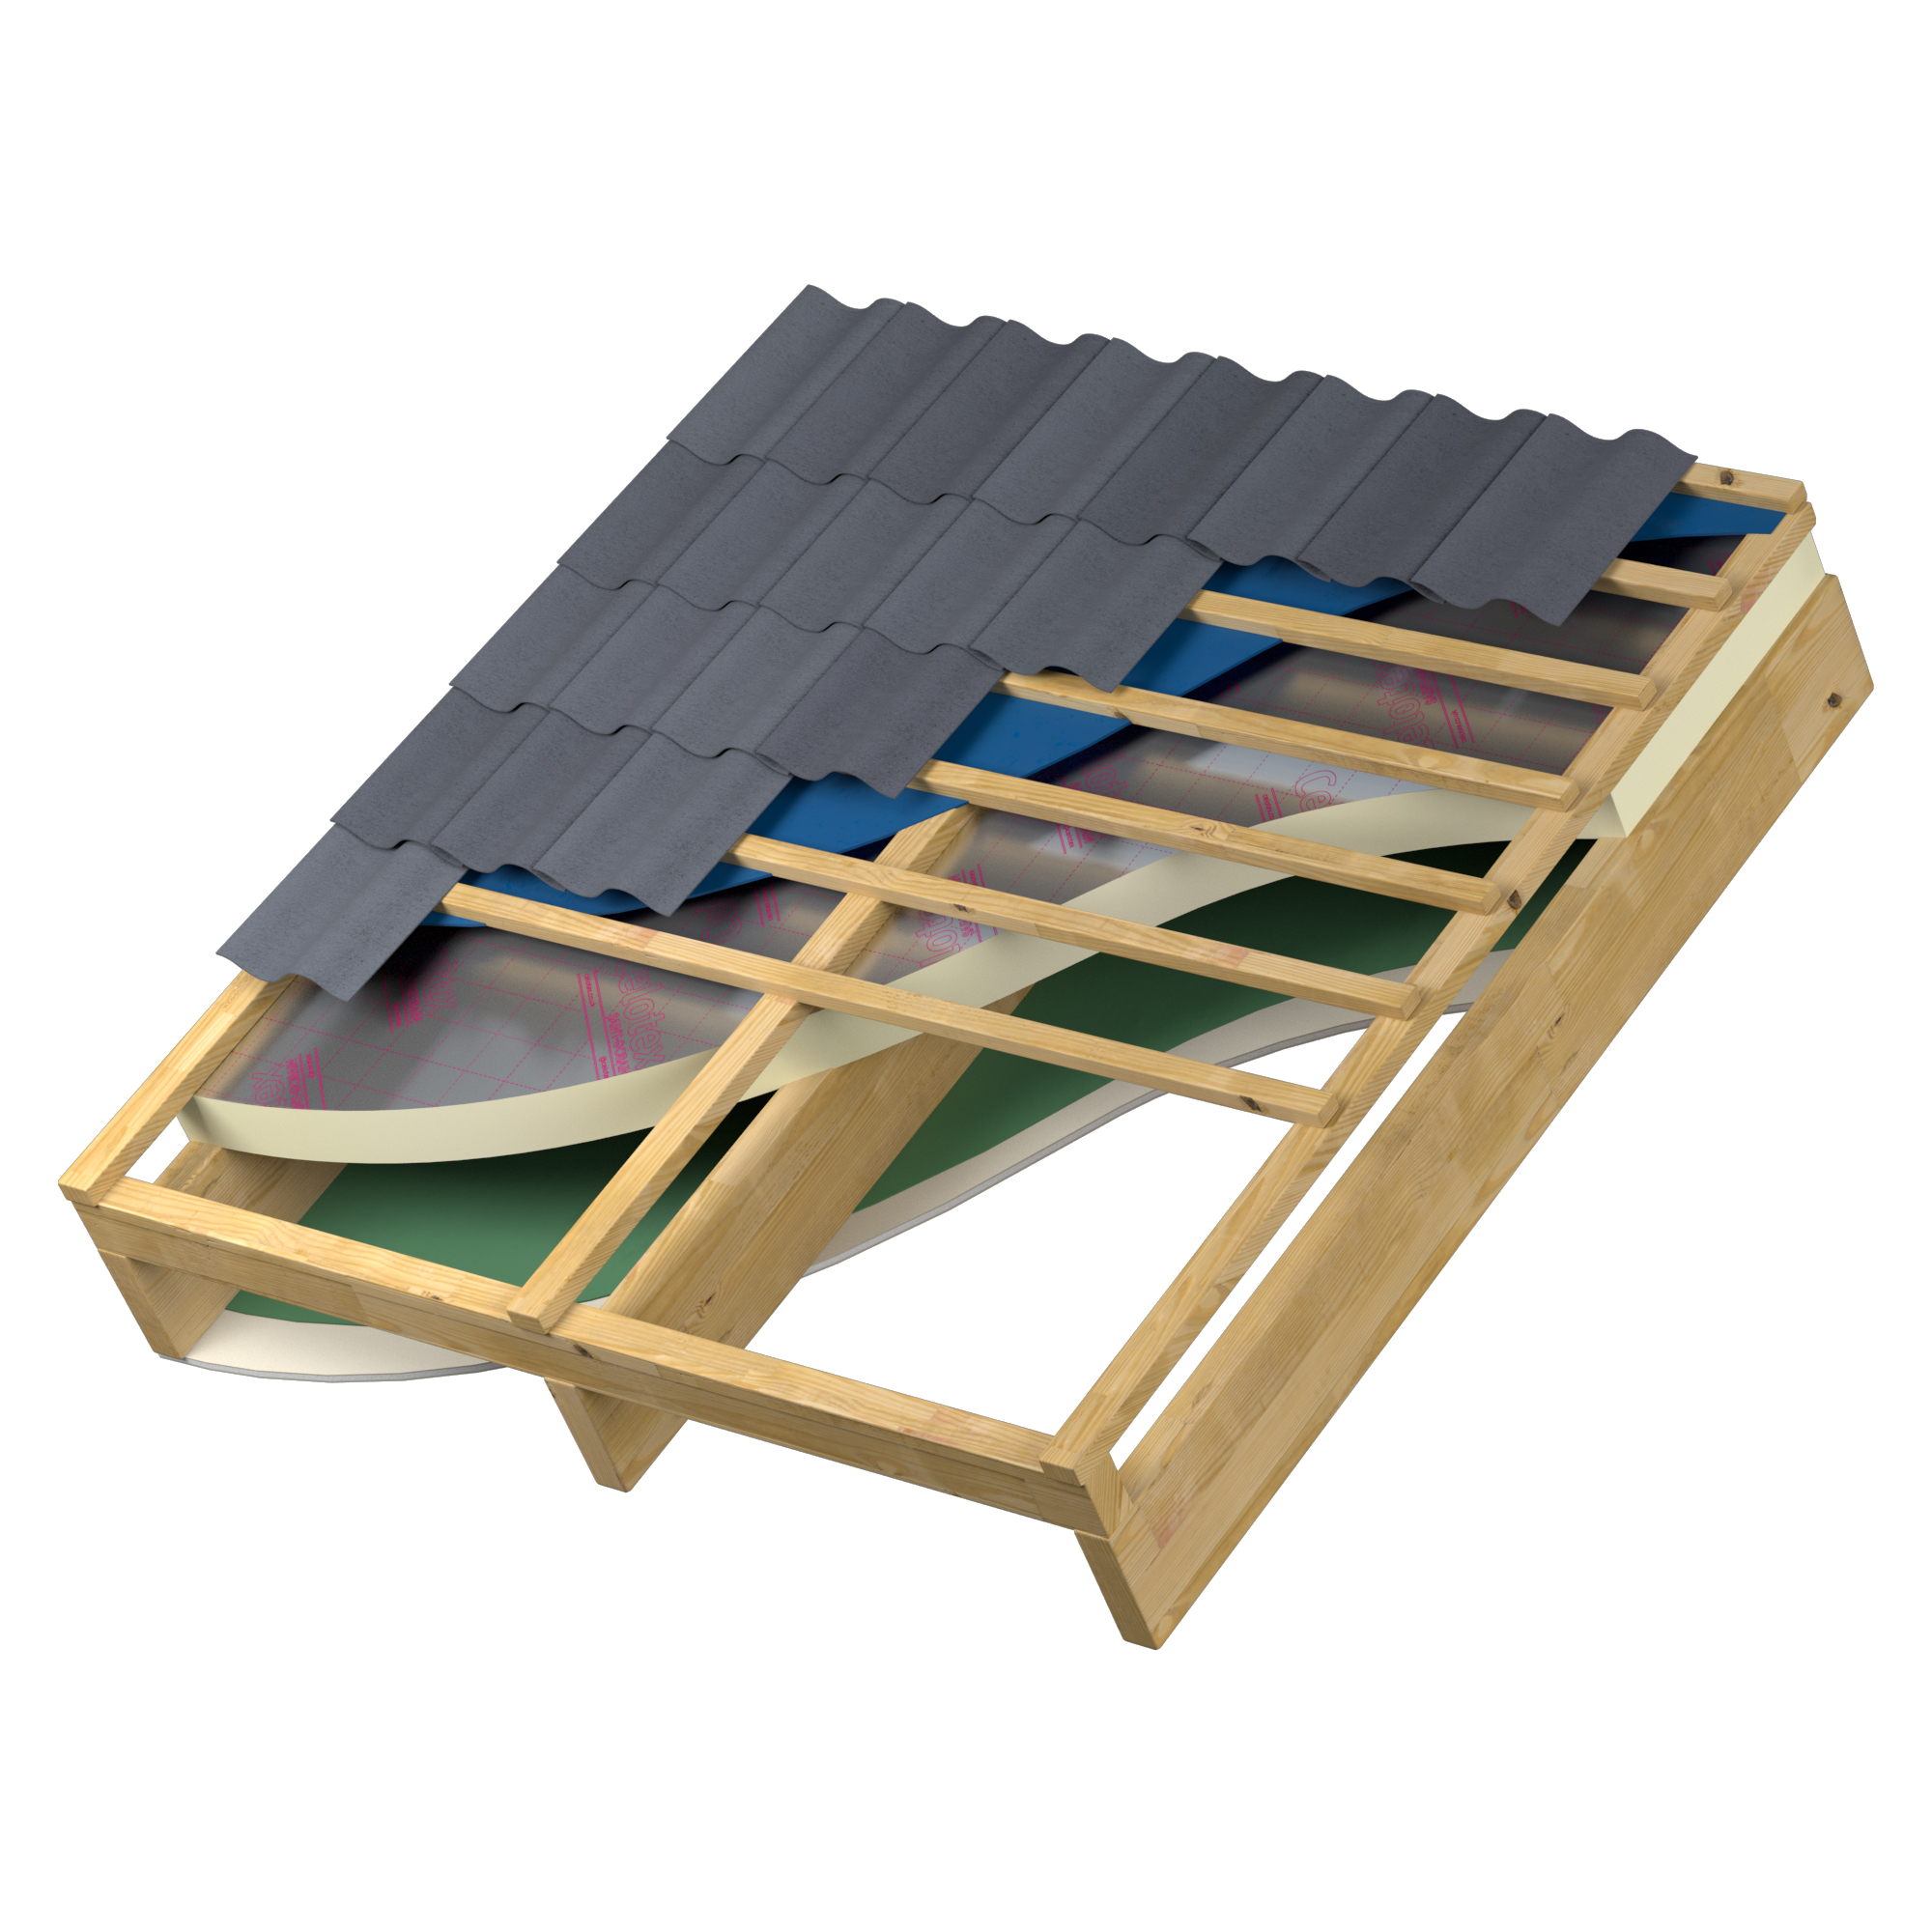 2020 Celotex Pitched Roof Sarking Insulation